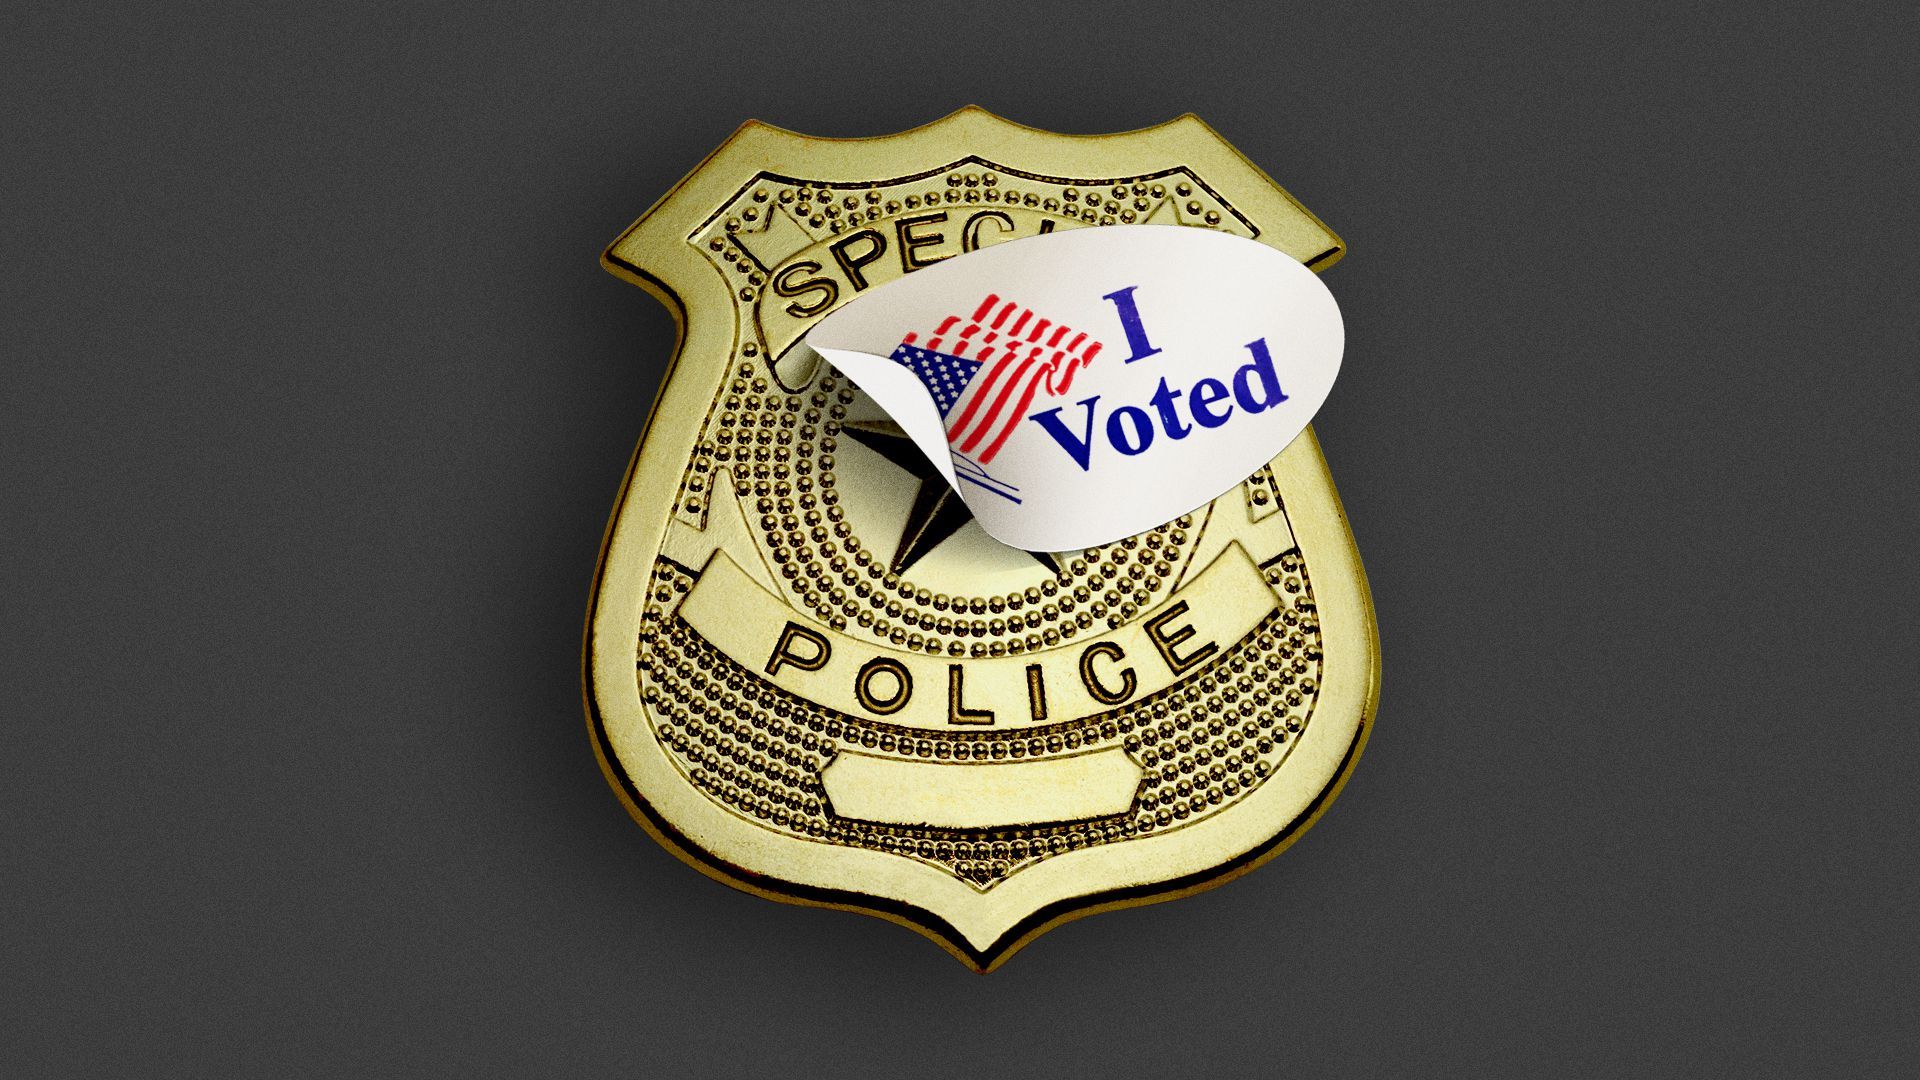 Gold police badge partially covered by an "I voted" sticker. 